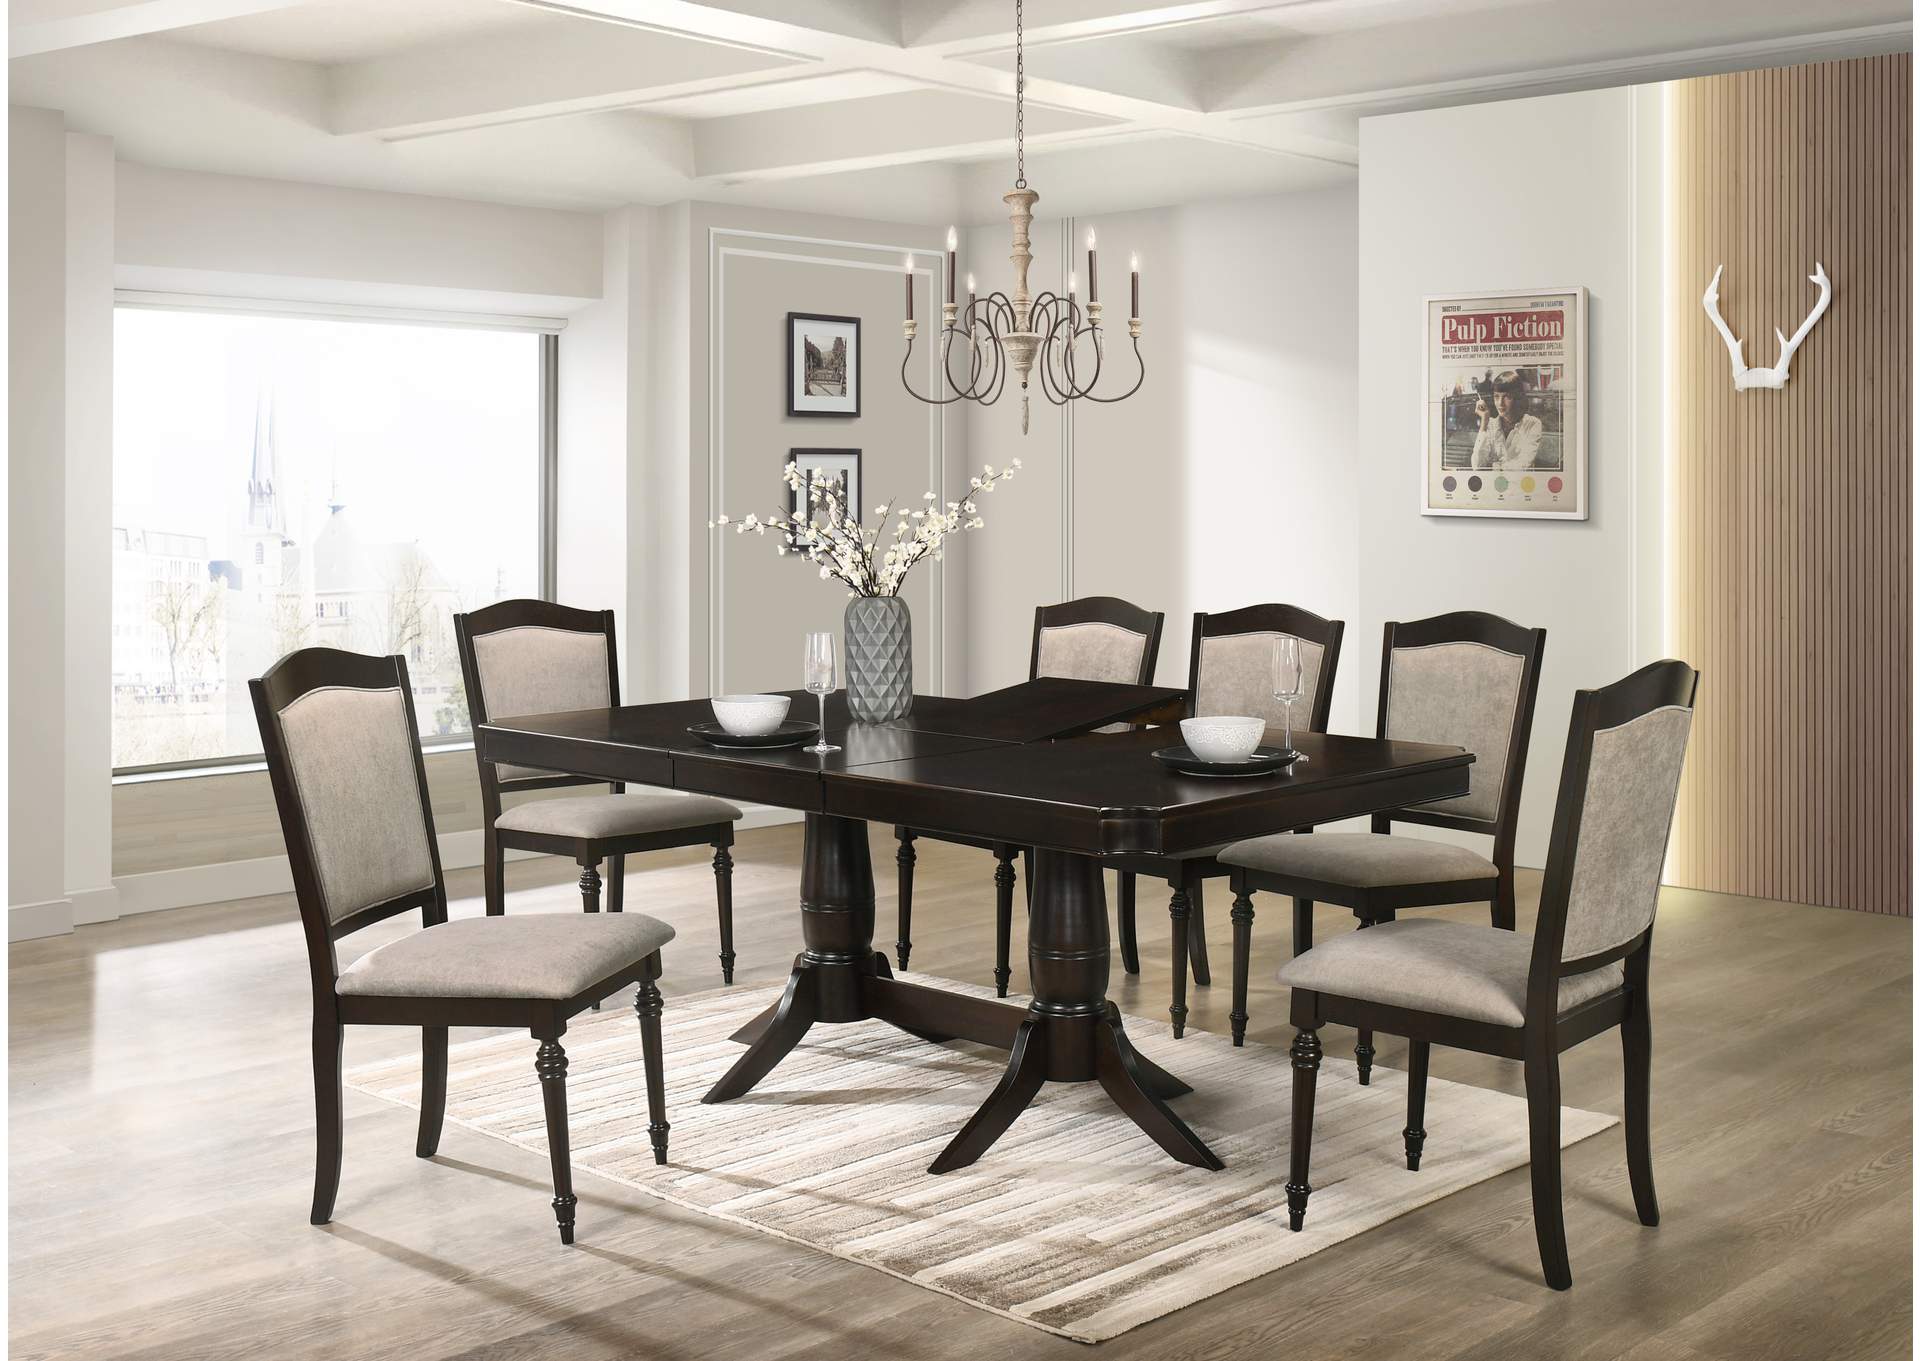 Windsor Chocolate & Beige 7 Piece Dining Set -Table W/ 6 Side Chairs,Cosmos Furniture